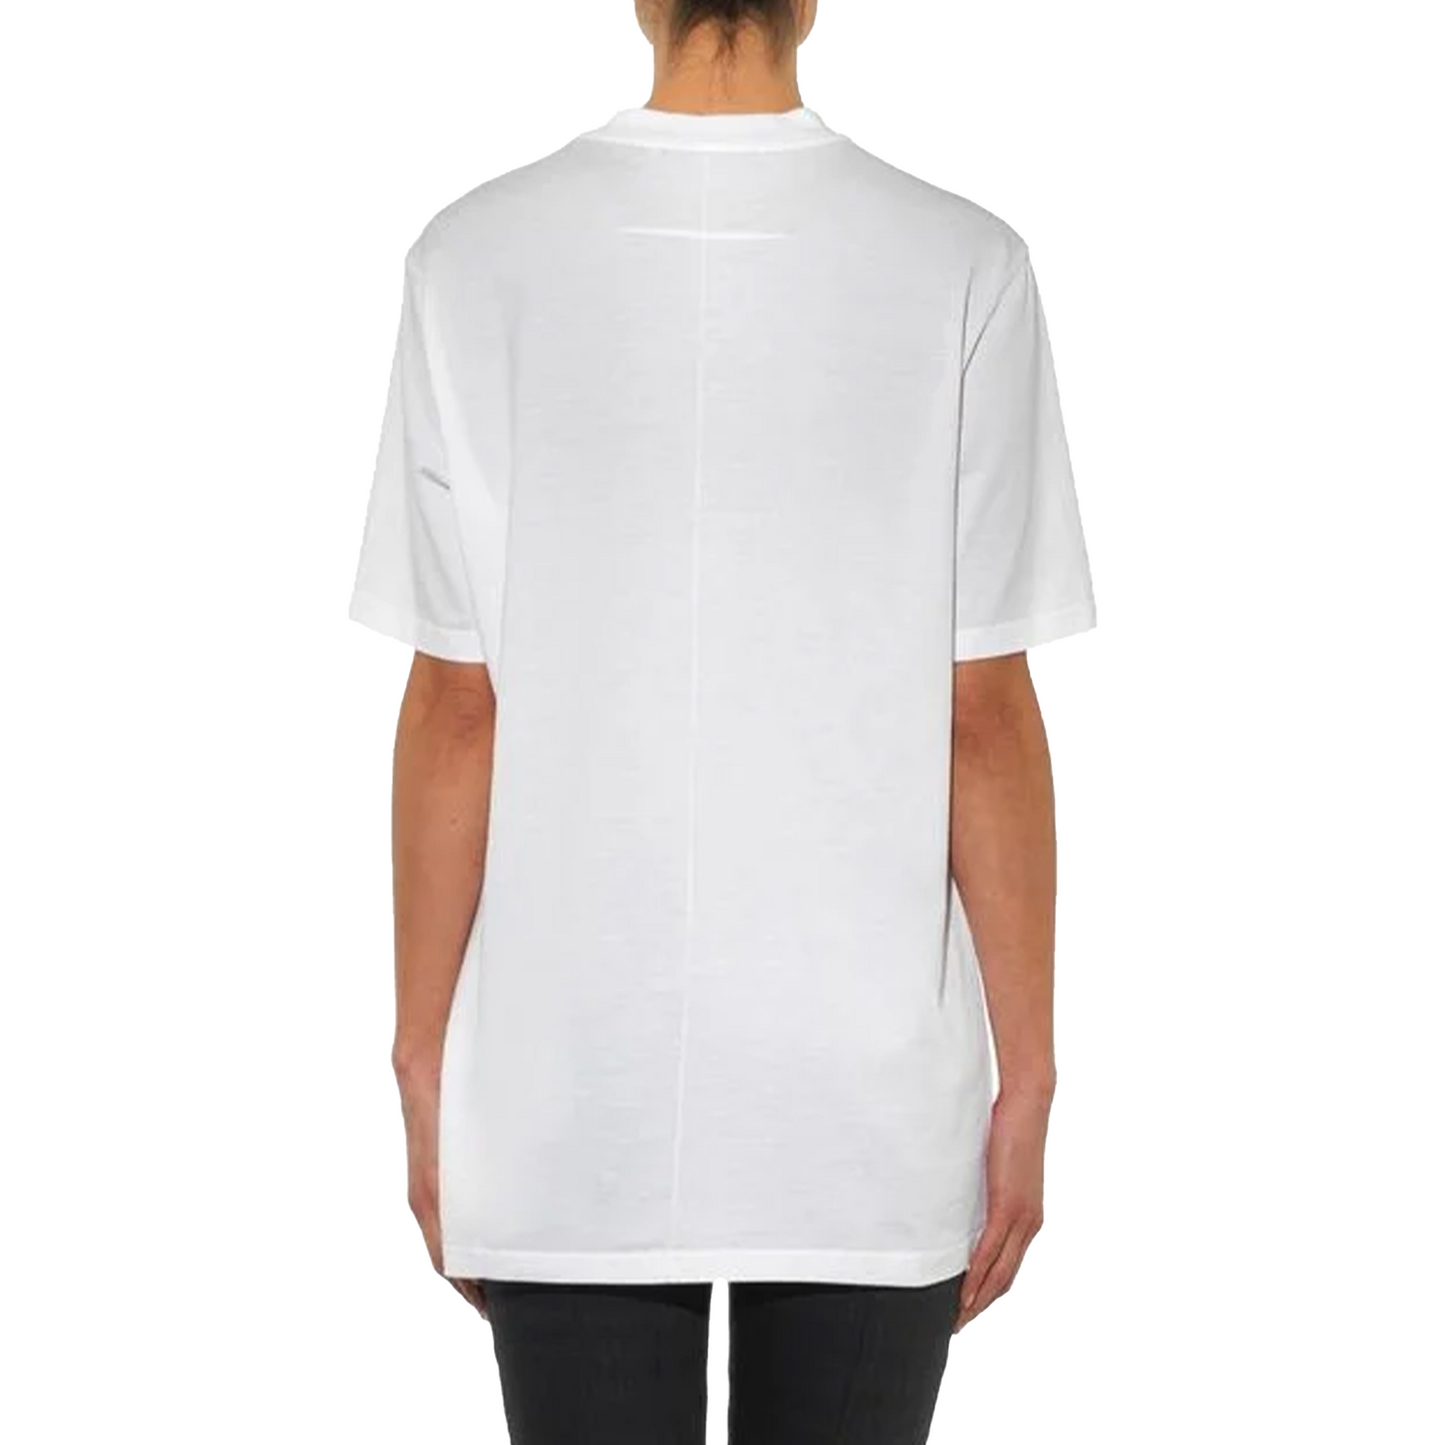 Givenchy Bambi Print Tee White (Oversize Fit)